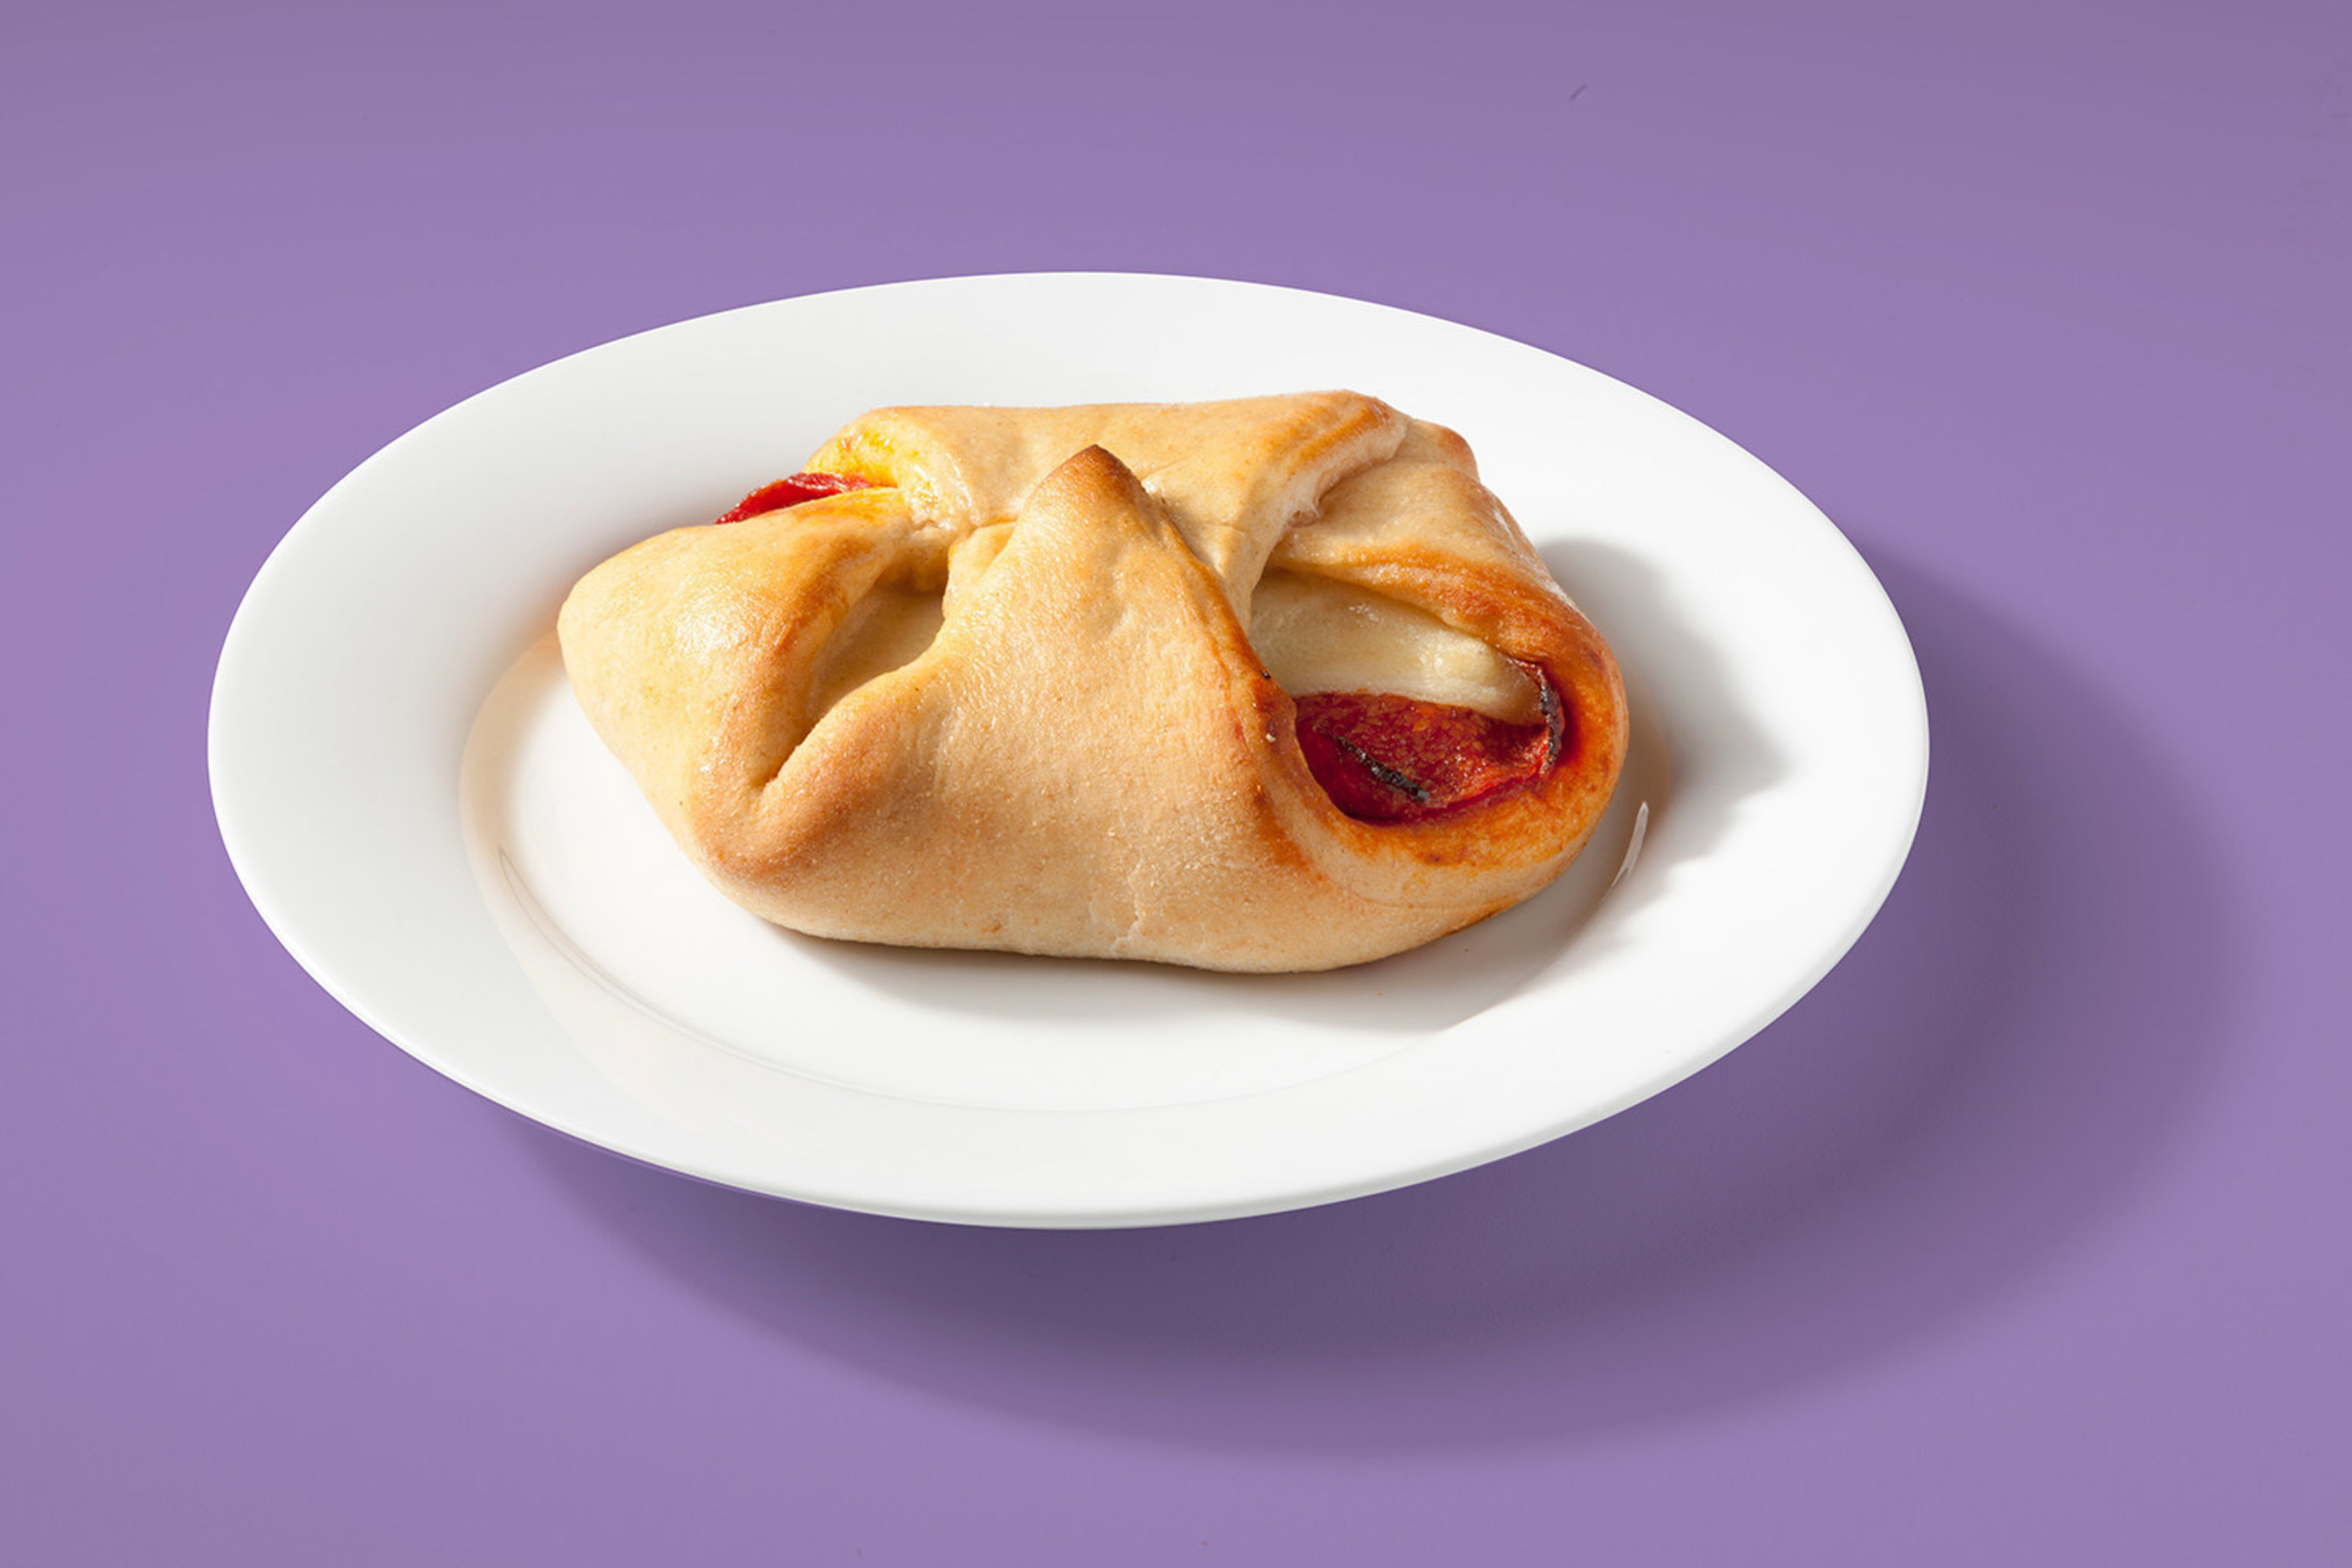 Pinwheels are now available in three varieties for school lunch from ES Foods. Handmade with with whole grain dough, Pinwheels are tasty, kid-friendly, and easy to hold.